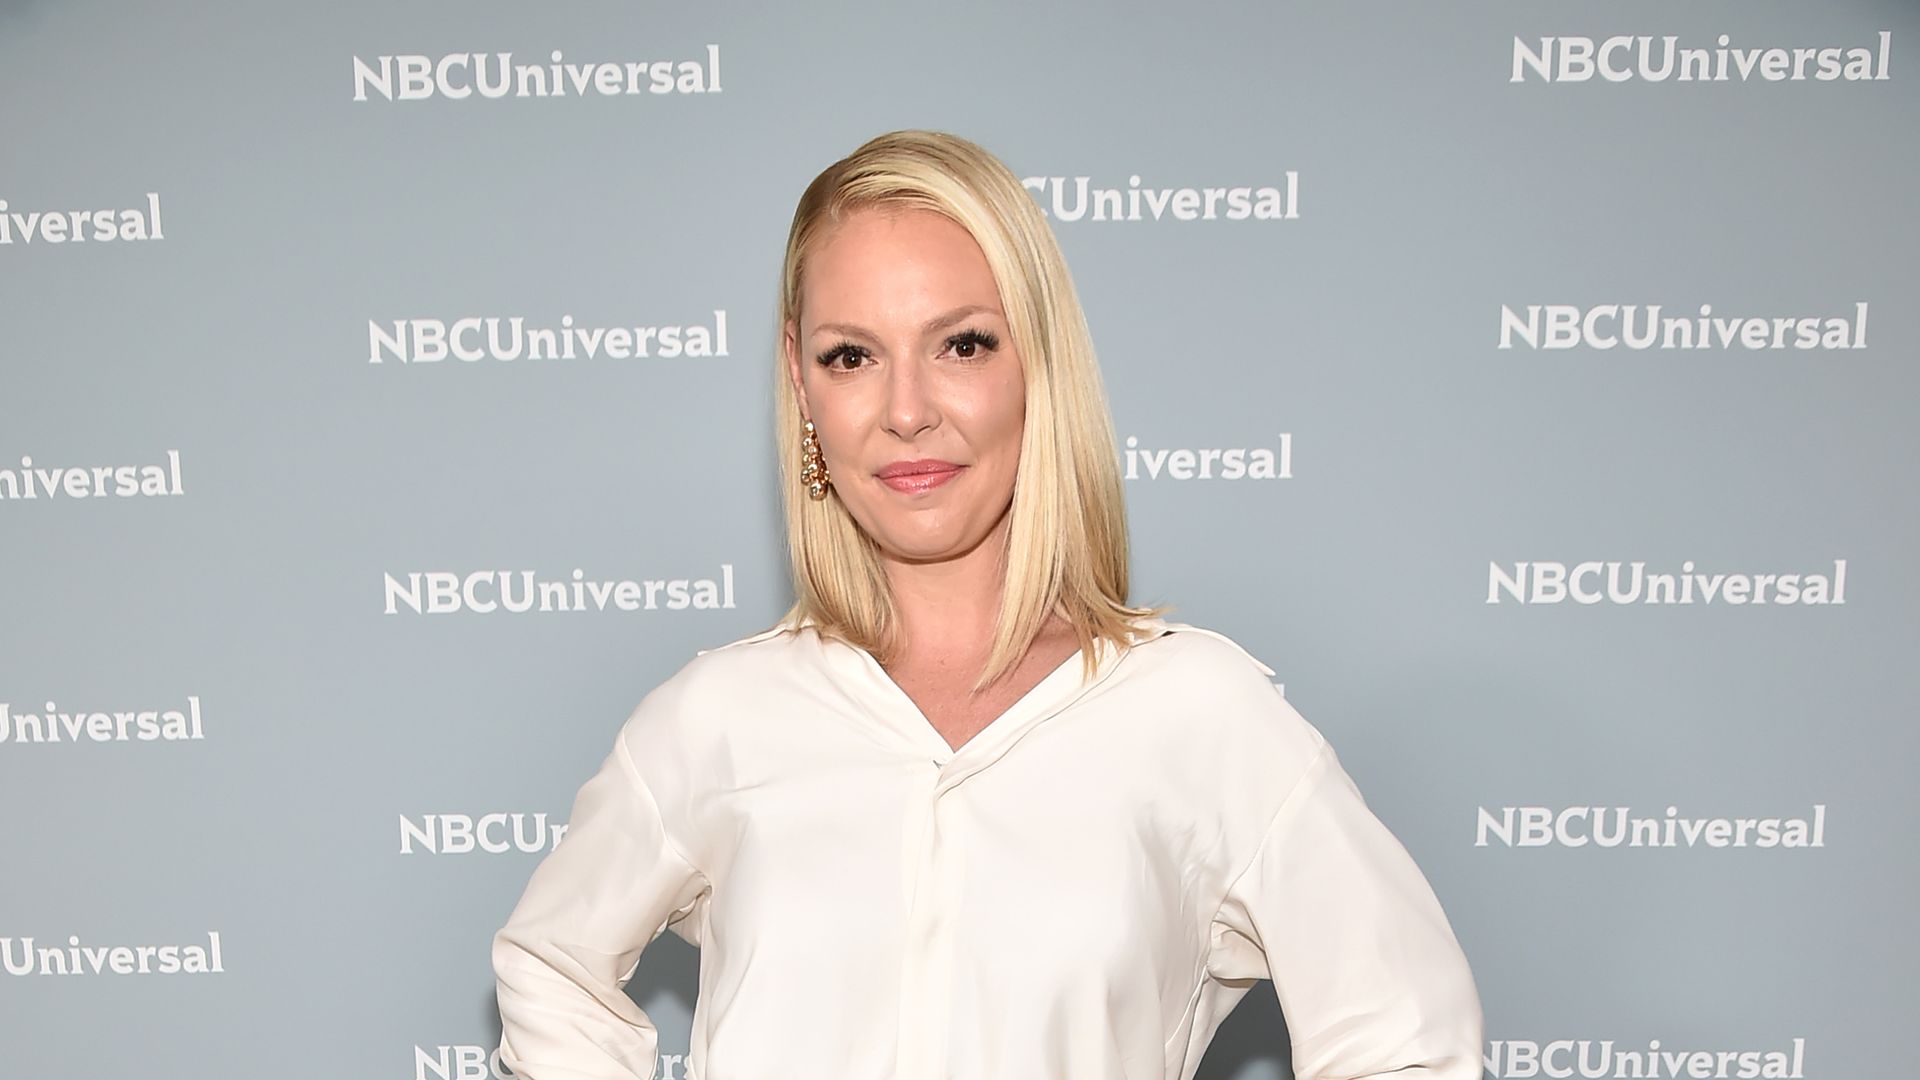 Katherine Heigl at NBCUniversal Upfront in New York City on Monday, May 14, 2018